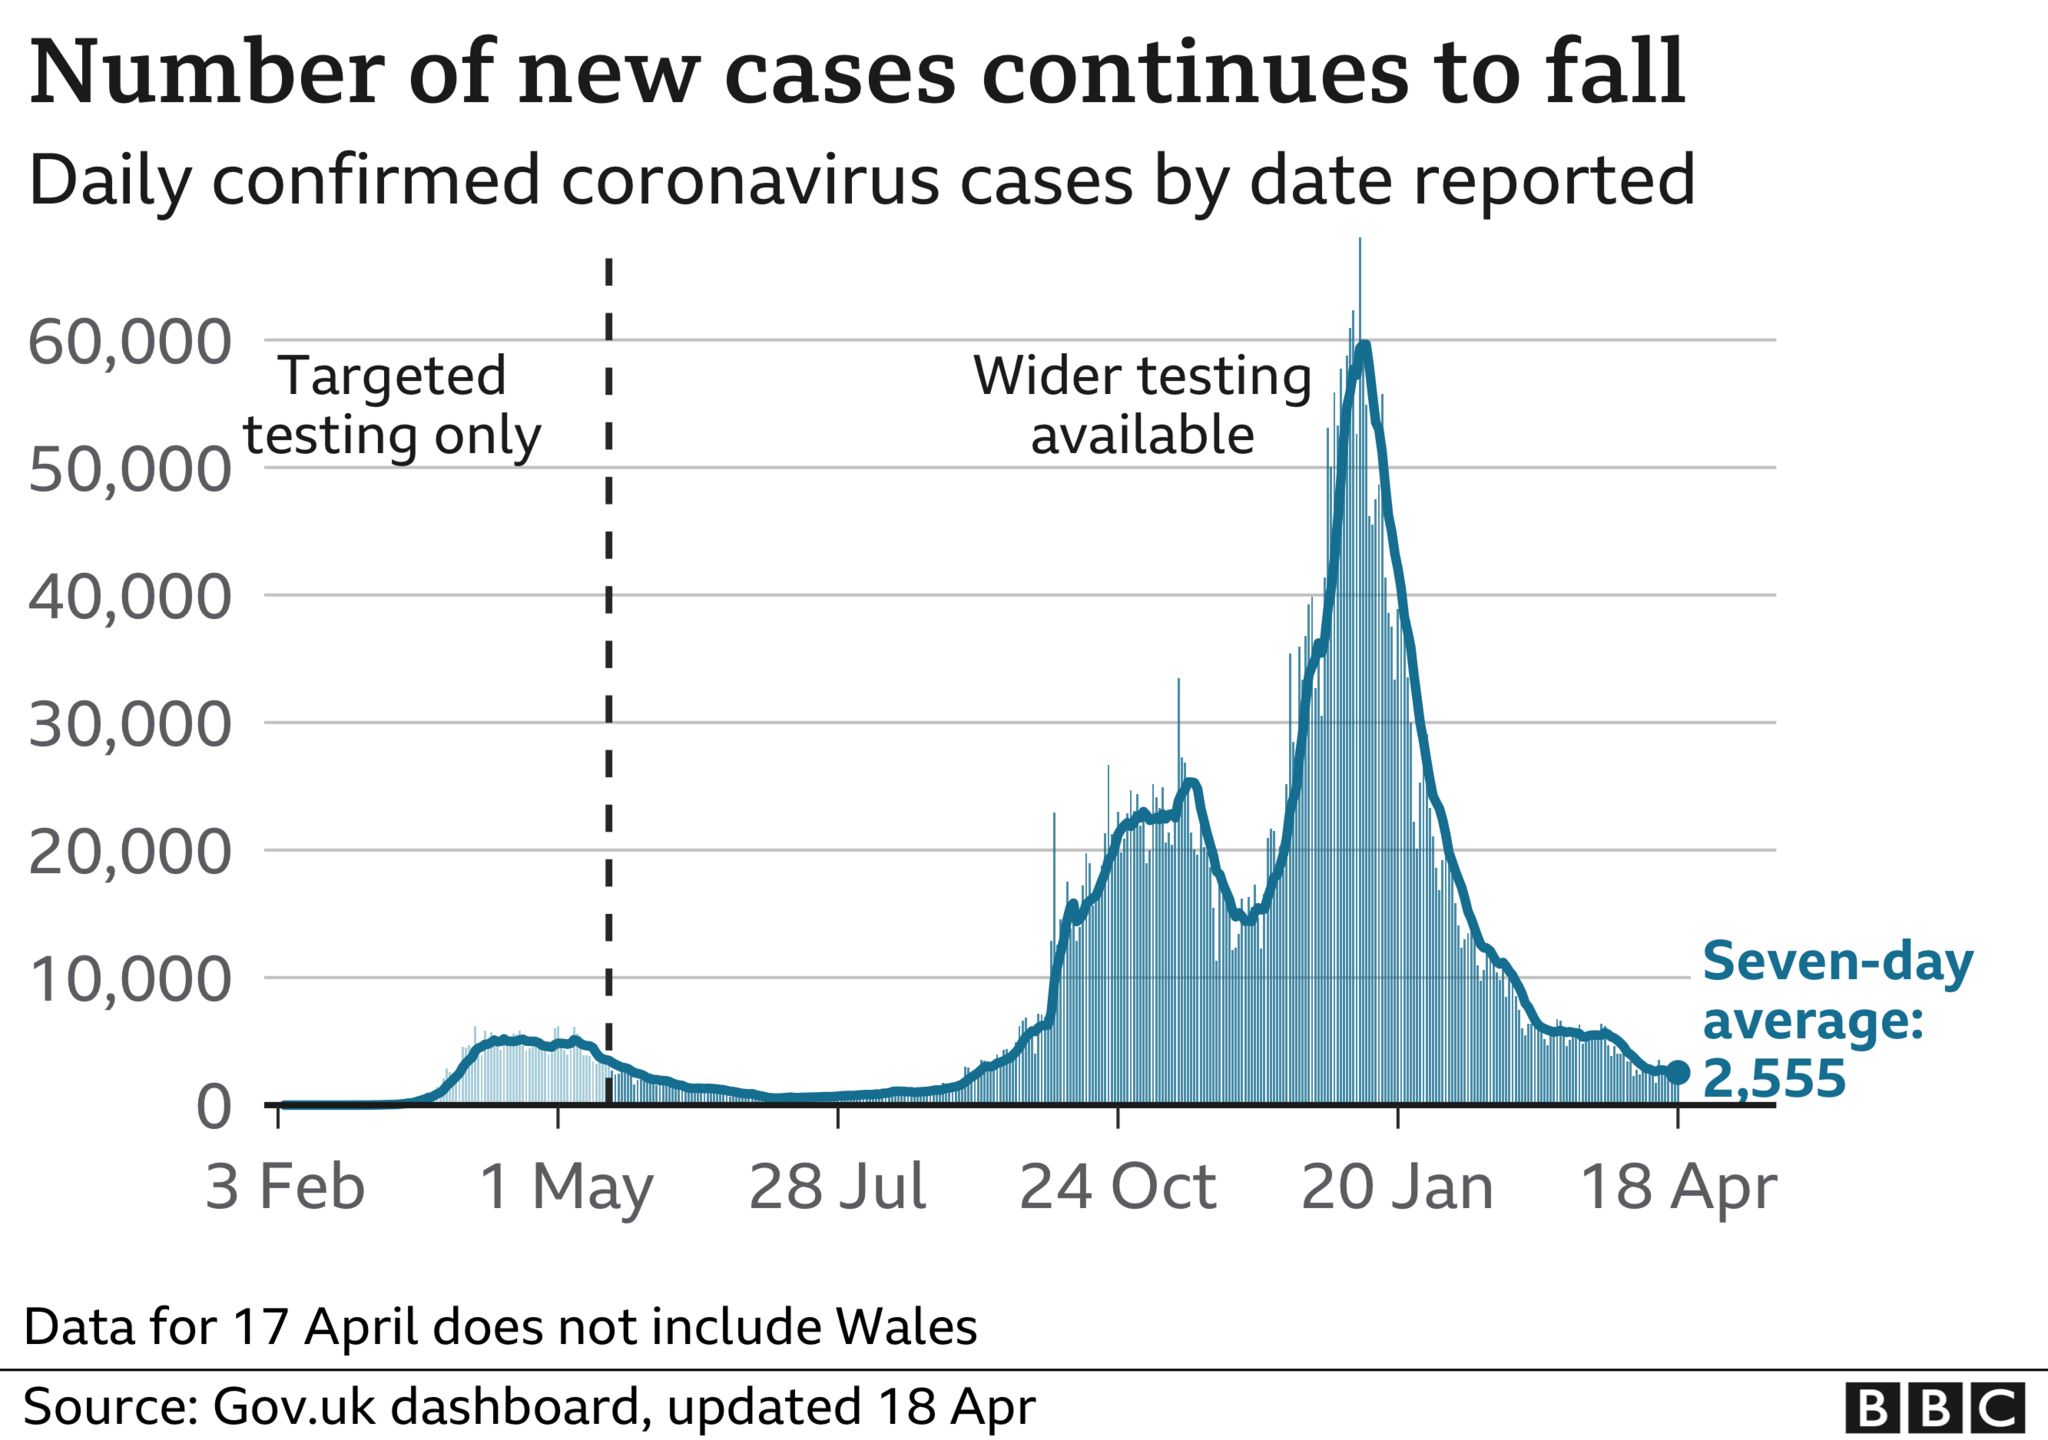 Graph showing the number of new coronavirus in the UK continuing to fall